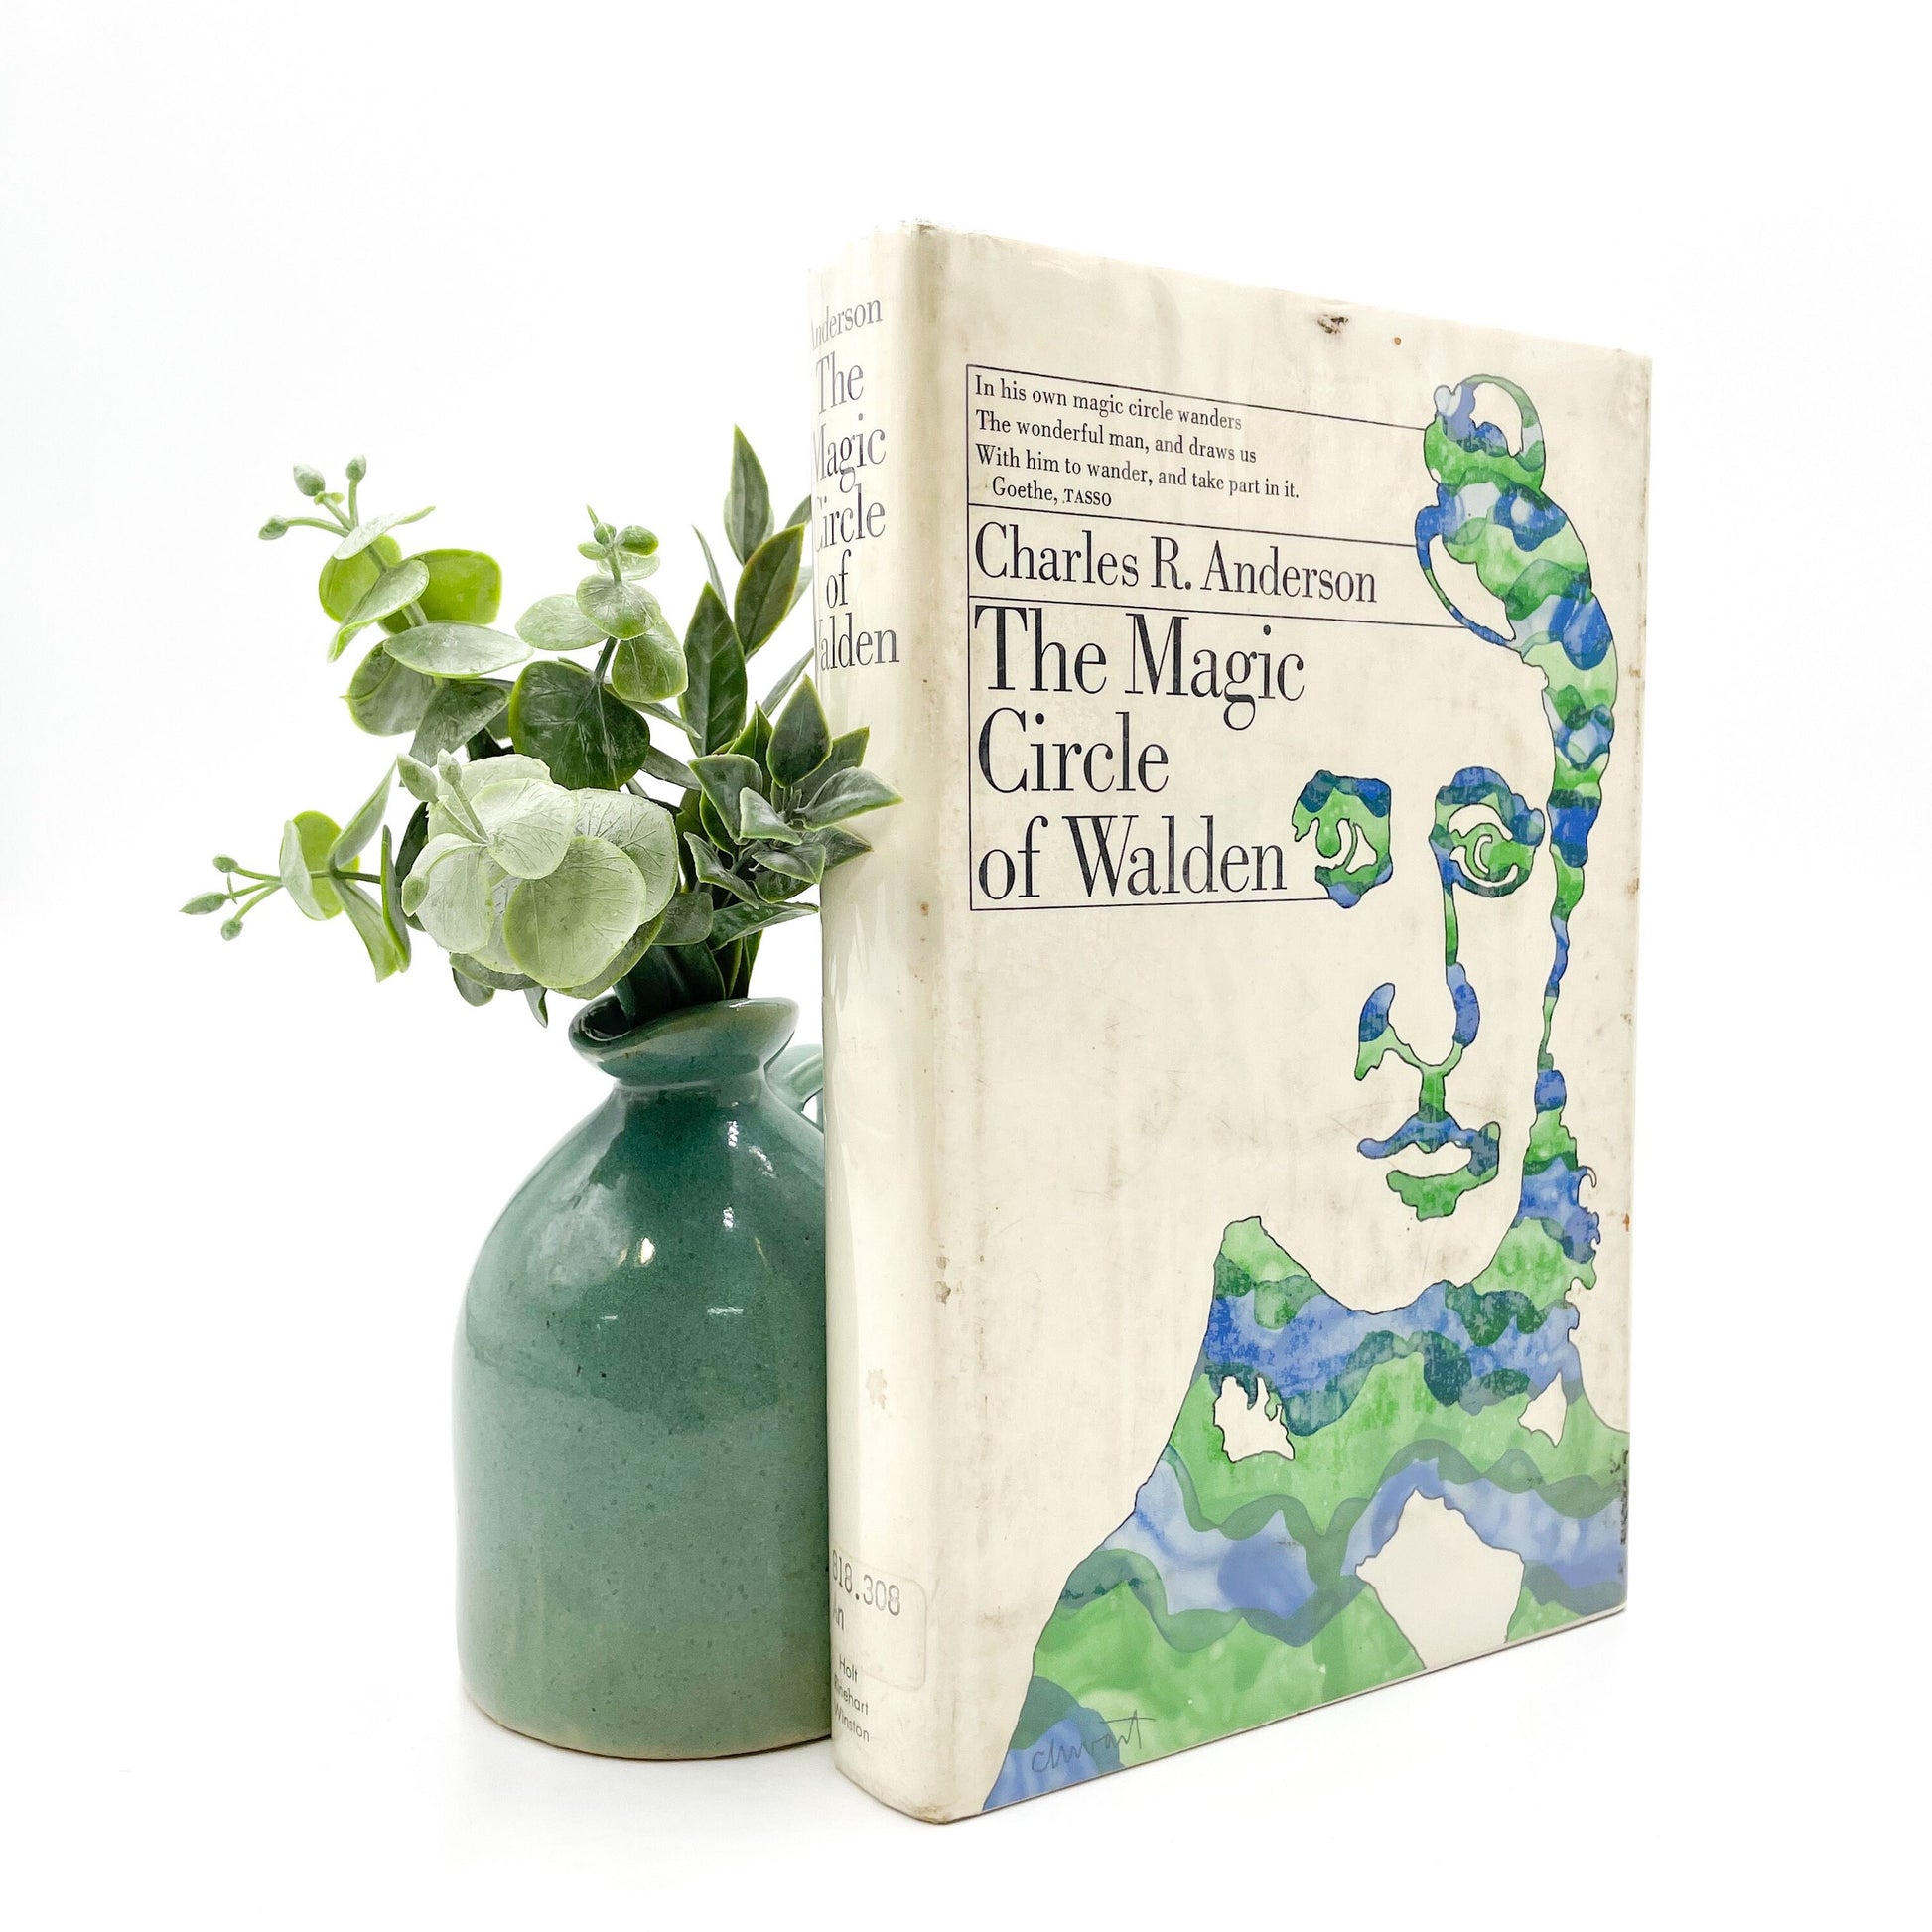 First Edition, The Magic Circle of Walden by Charles R. Anderson